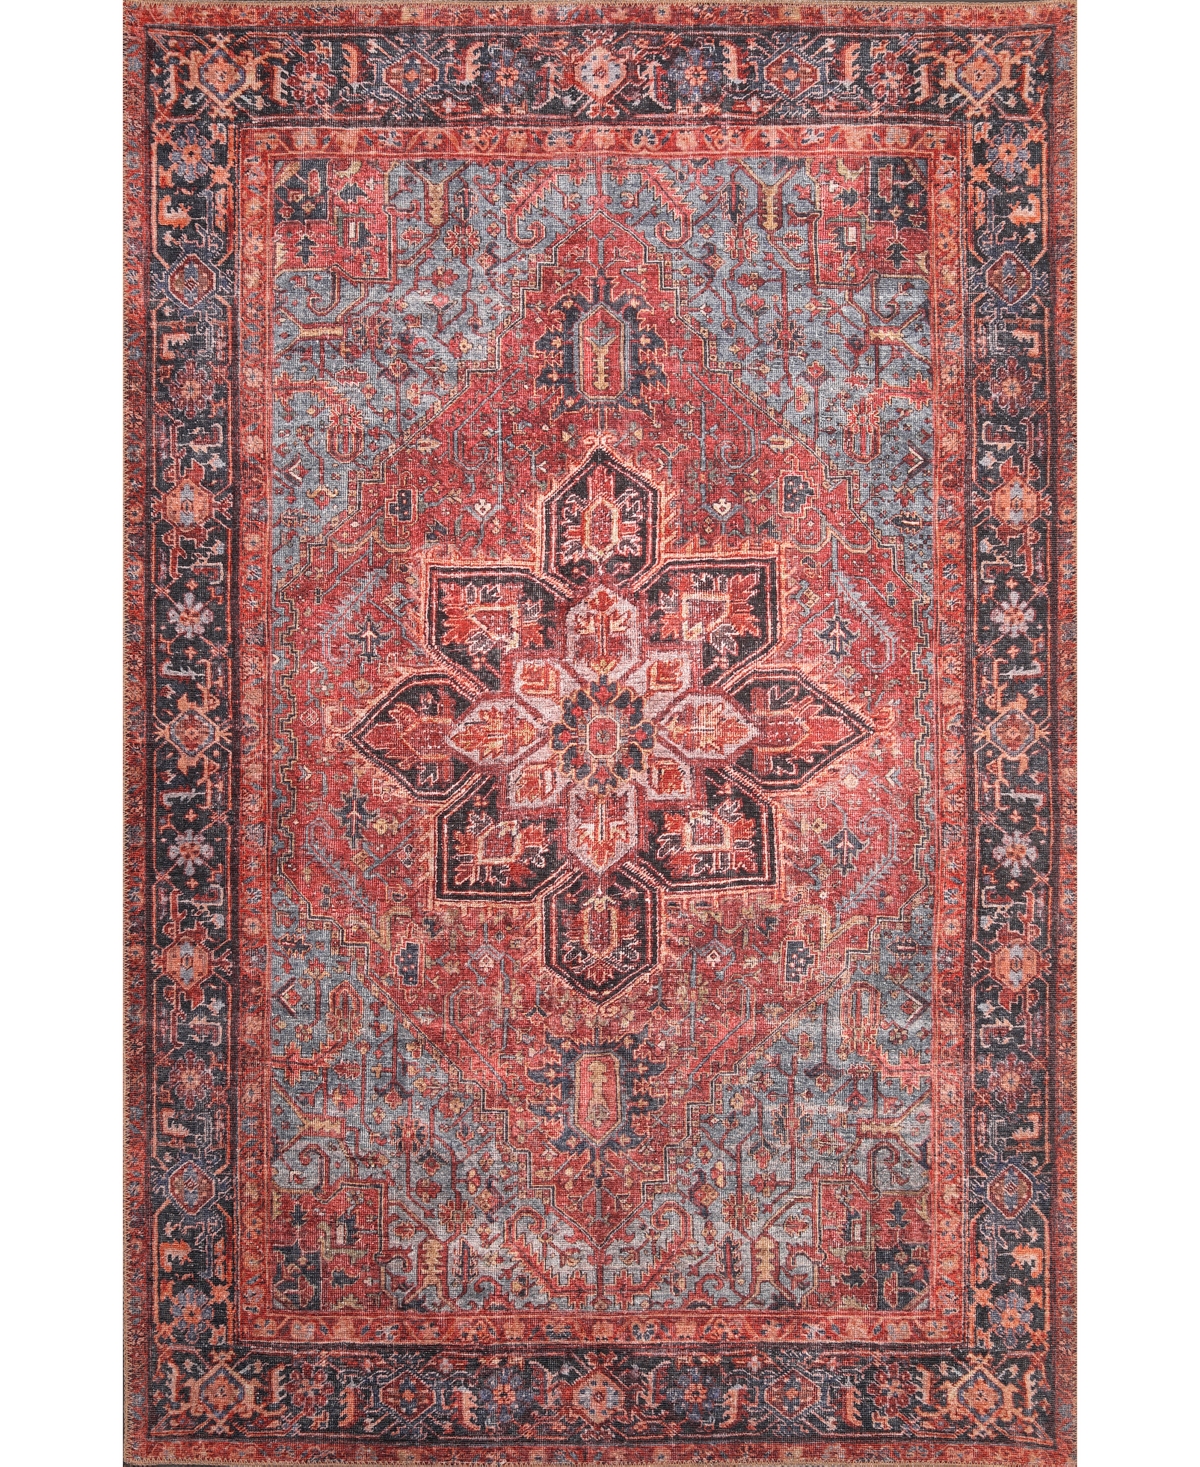 Kas London Machine Washable 4805 5' X 7'6" Area Rug In Red